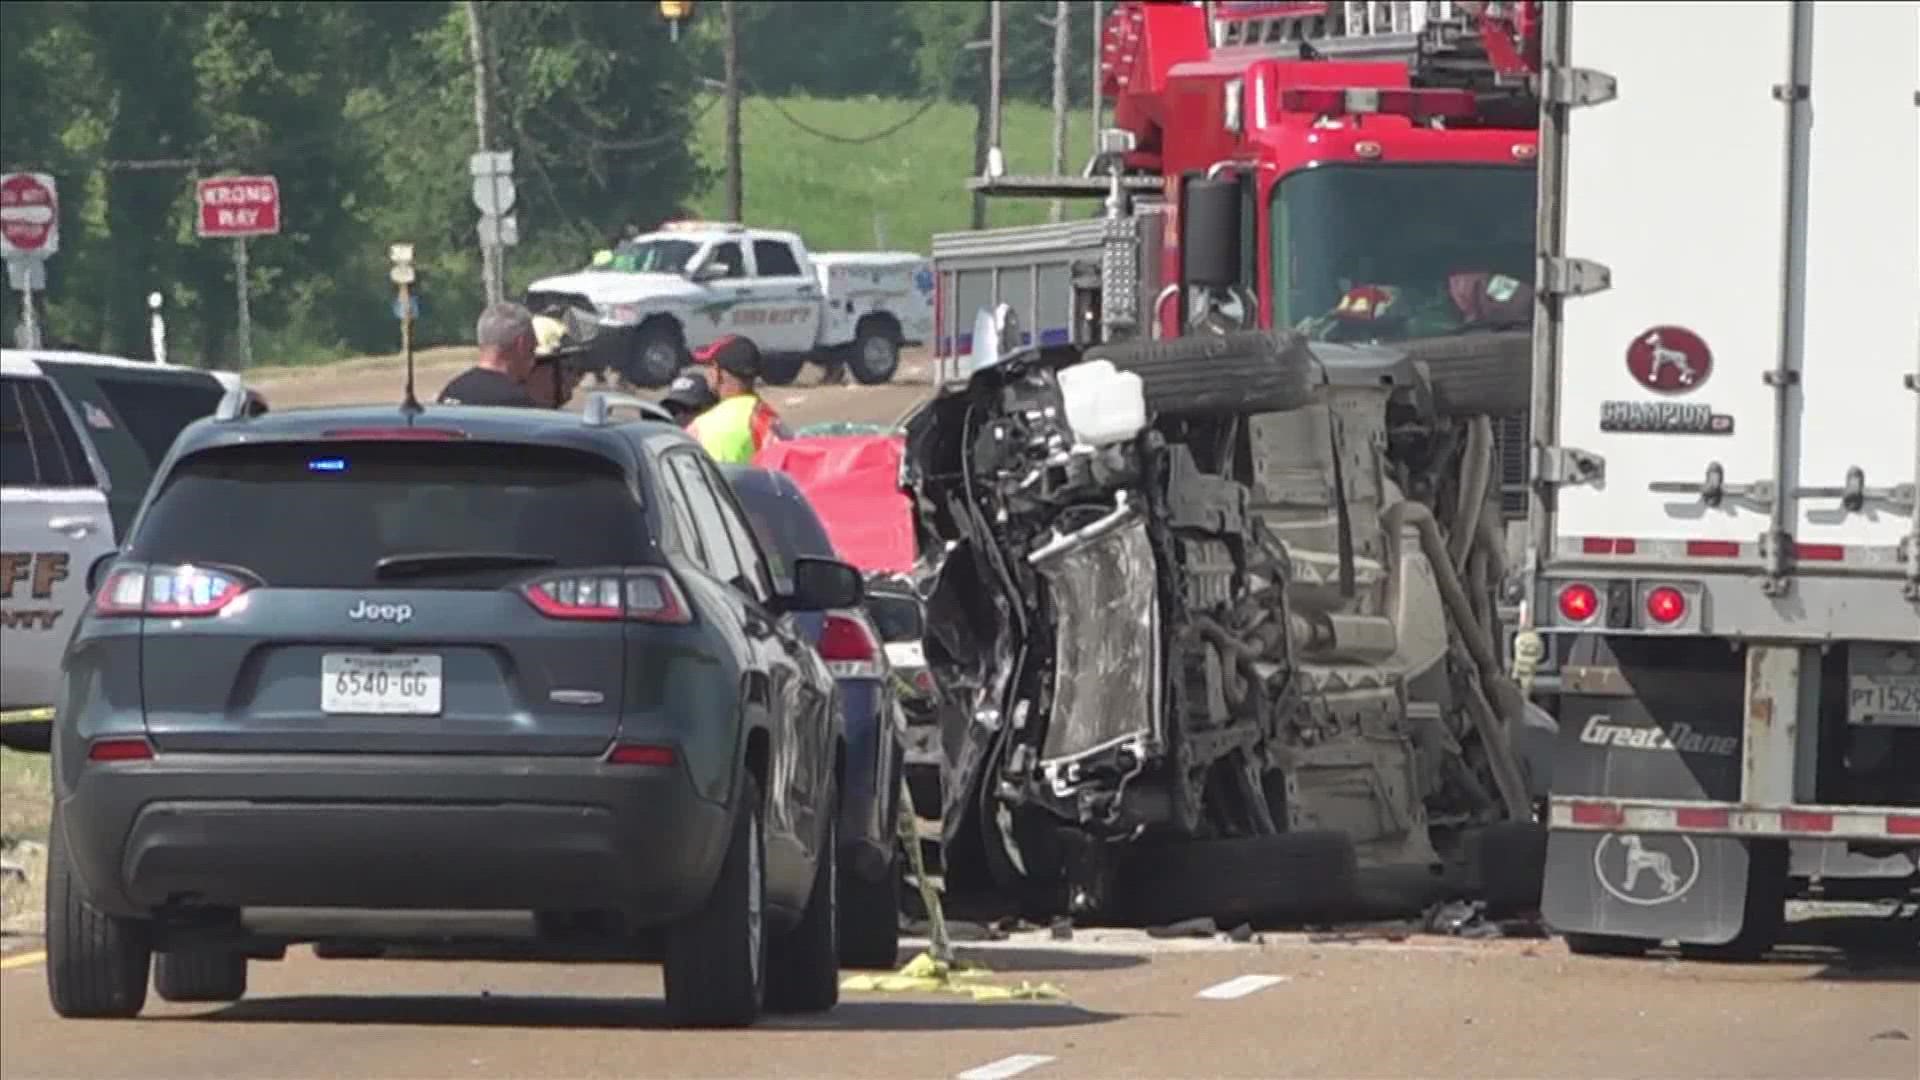 The crash happened before 9 a.m. Tuesday along Highway 51 at 385. Highway 51 is closed from 385 to Babe Howard Blvd.